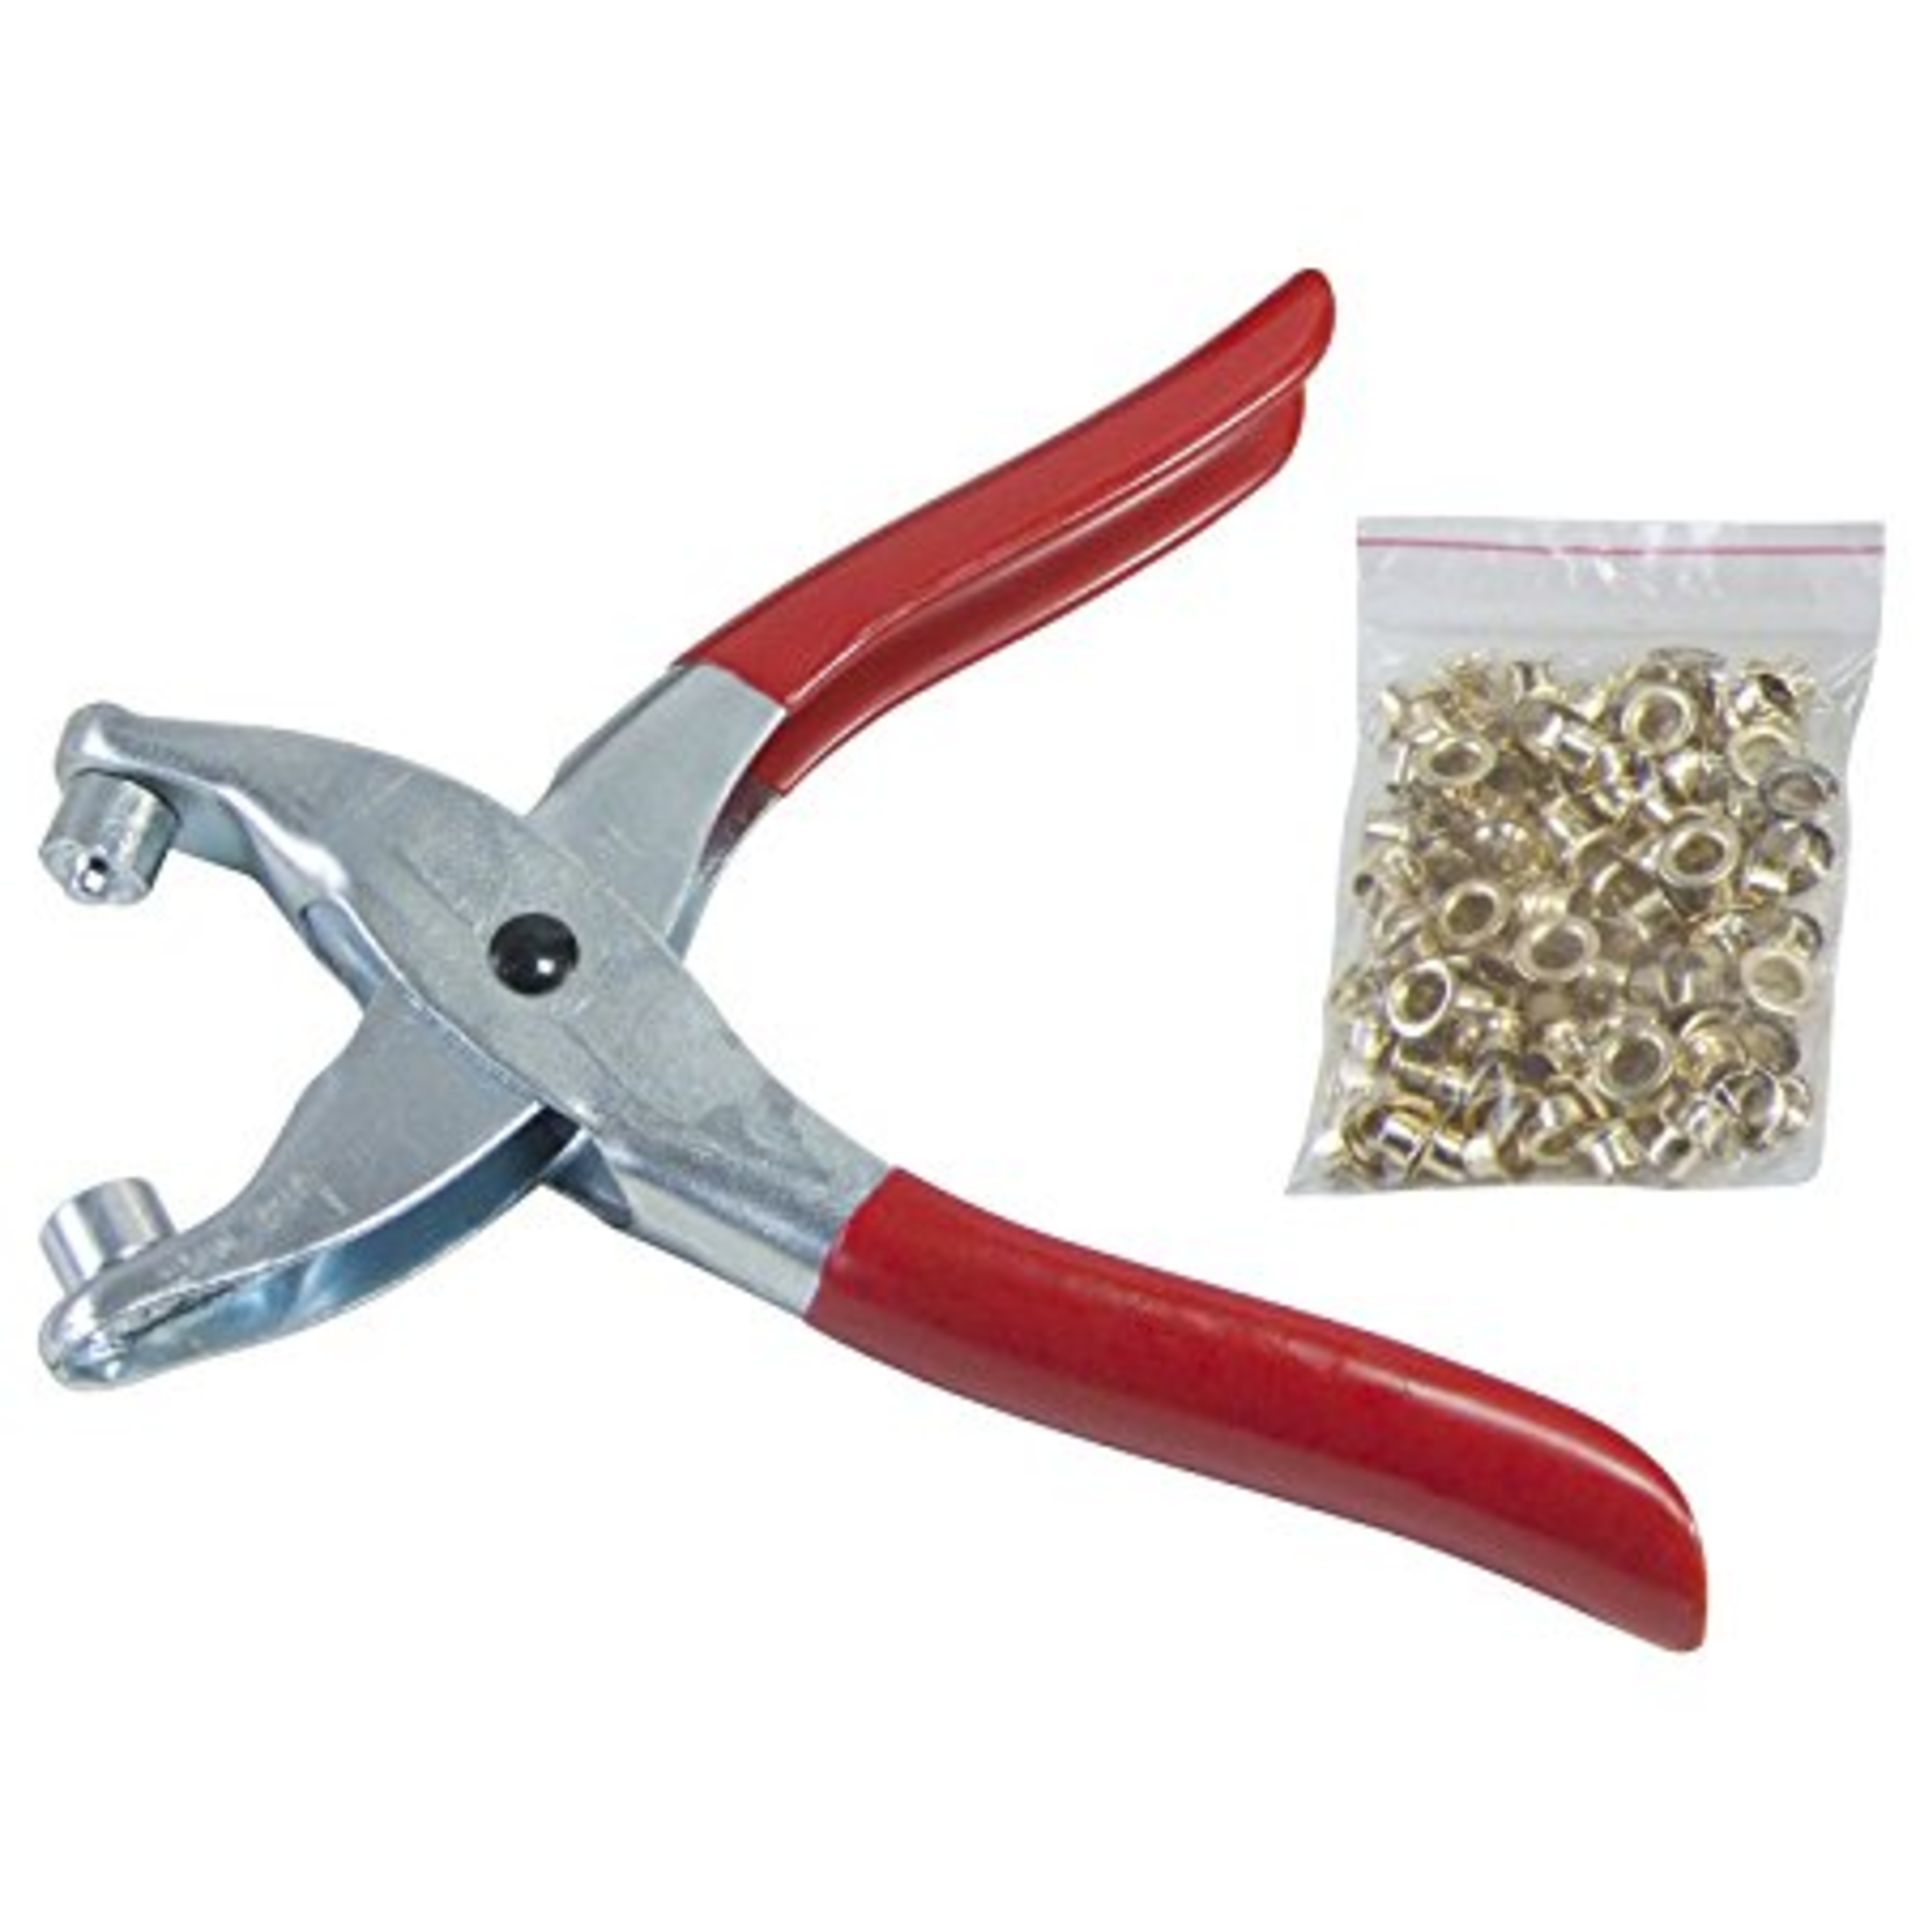 V Brand New Eyelet Plier With Eyelets - Lightweight Steel Construction - Spring Loaded For Ease Of